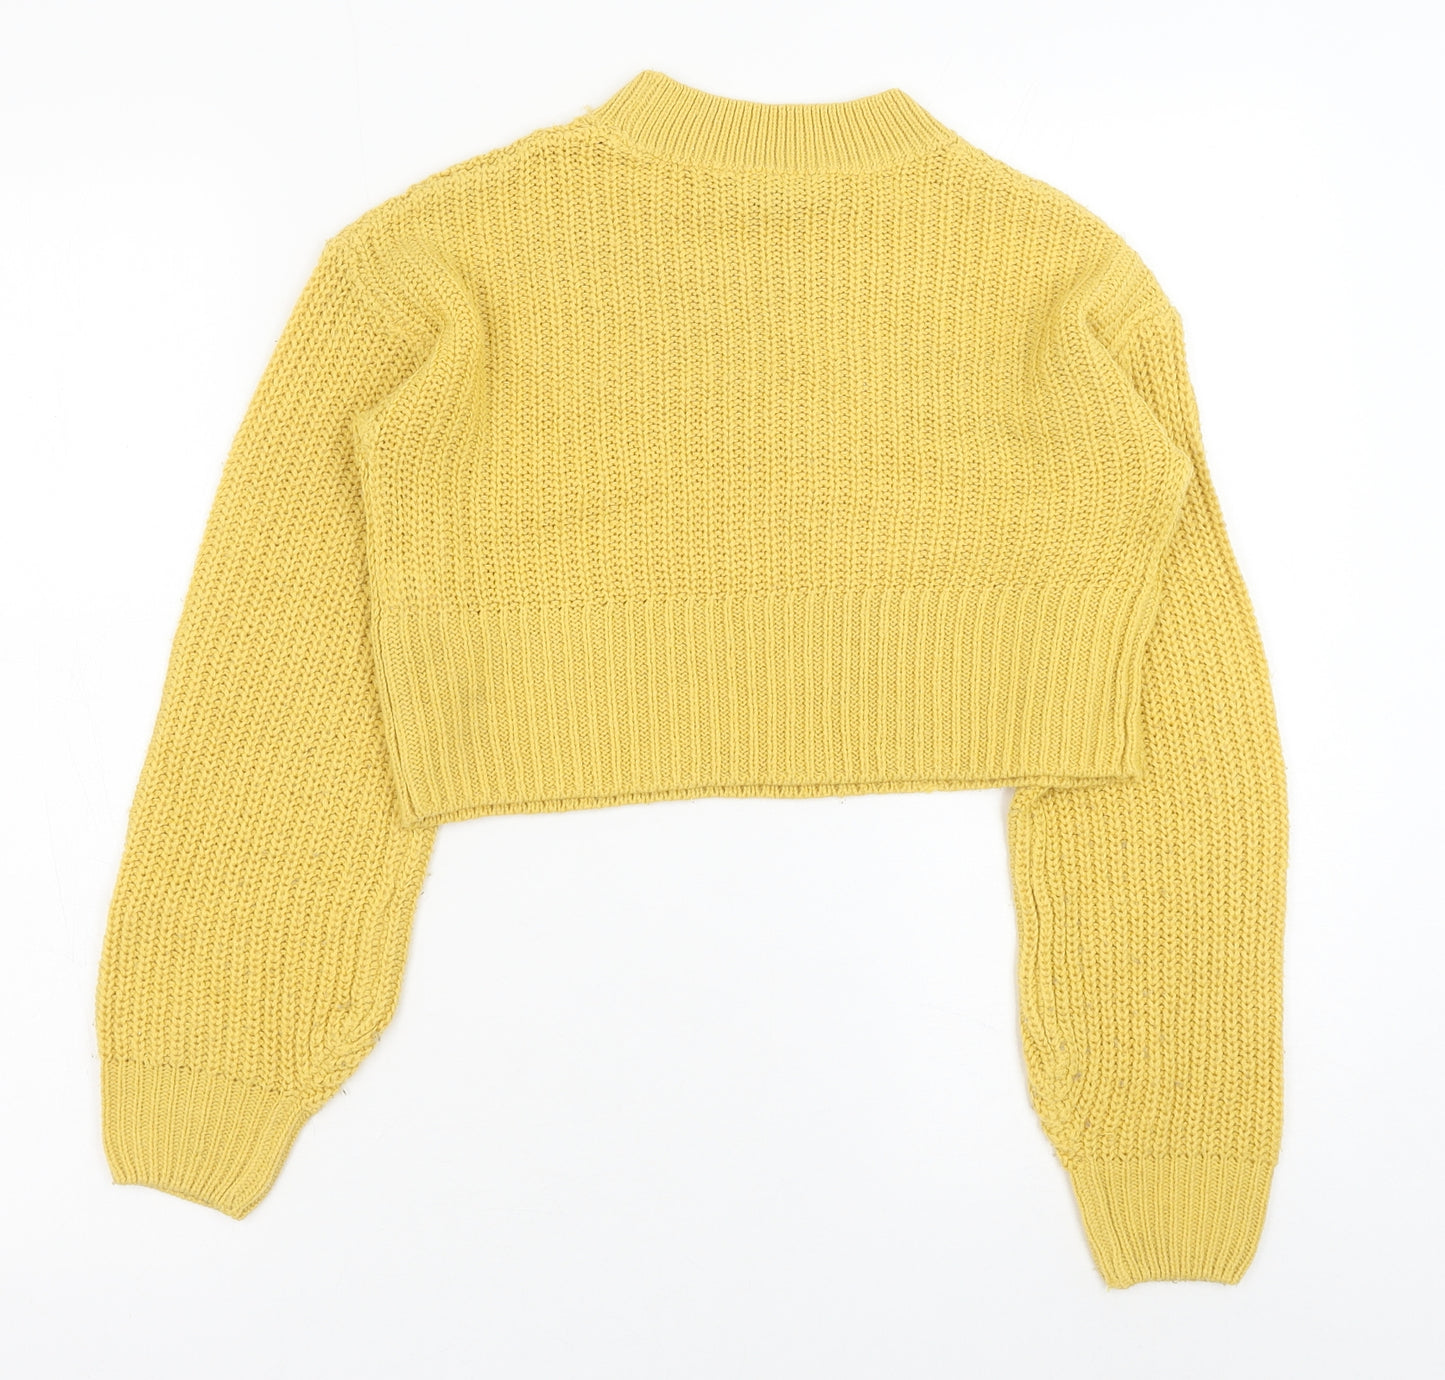 New Look Girls Yellow Round Neck Acrylic Pullover Jumper Size 9 Years Pullover